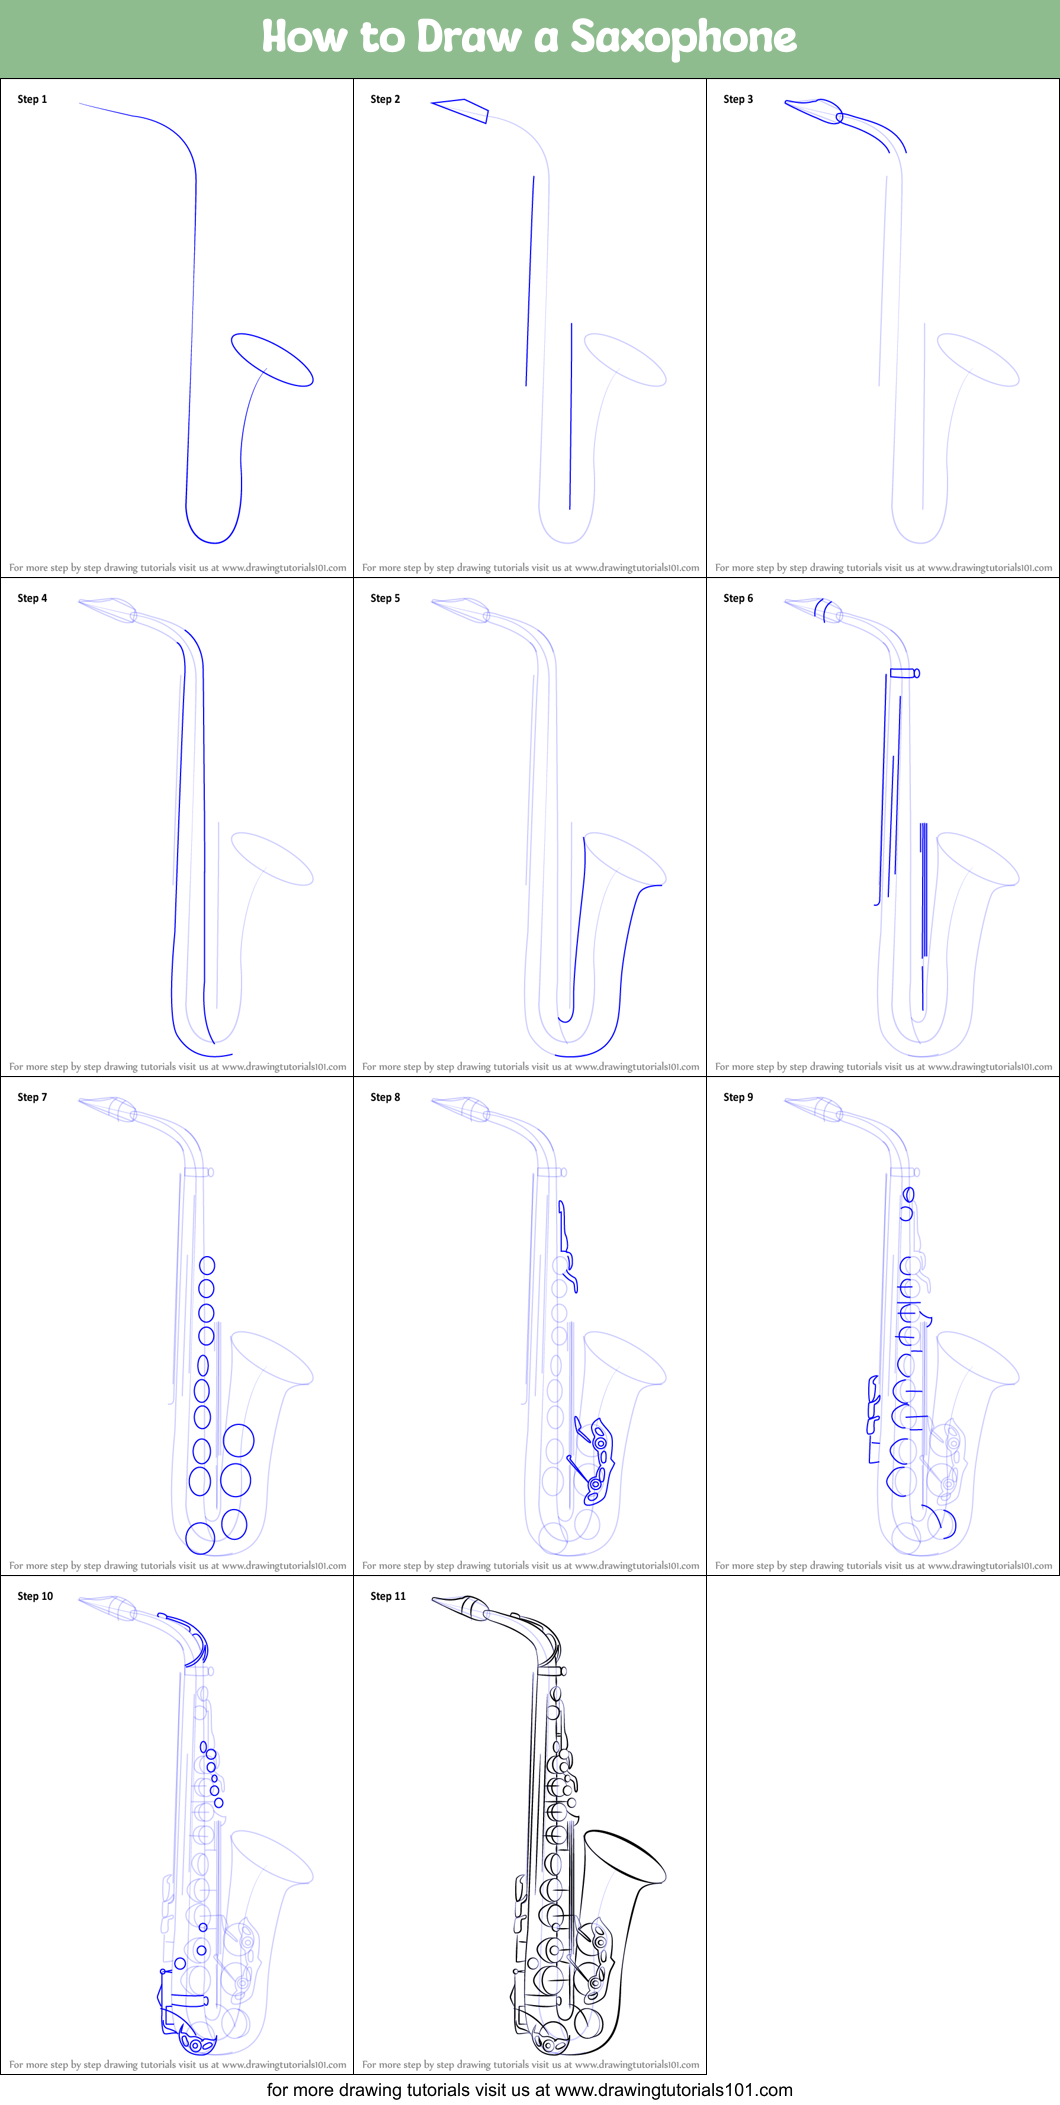 How to Draw a Saxophone printable step by step drawing sheet